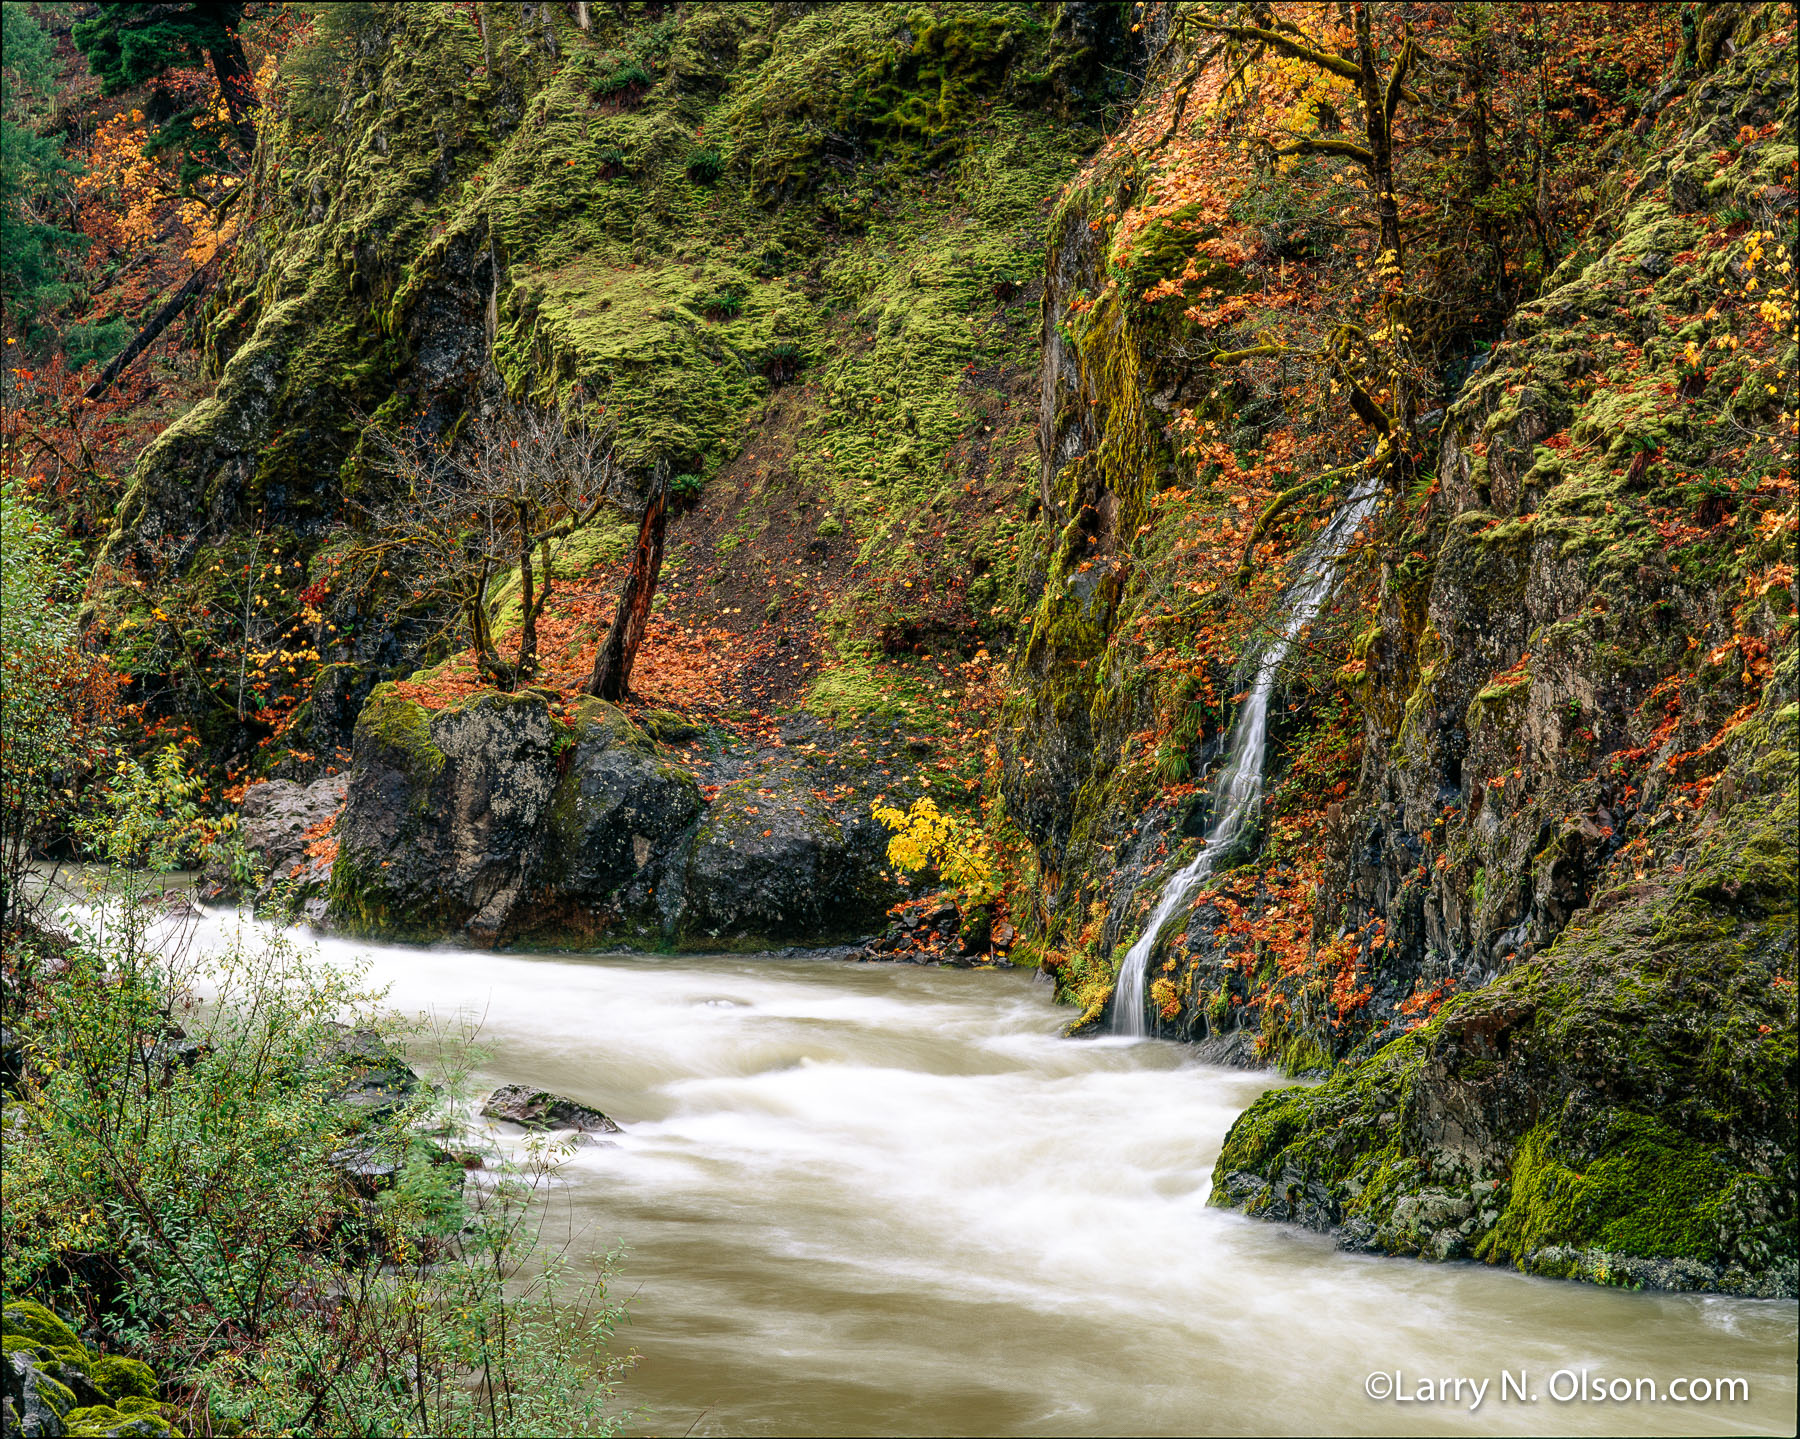 North Fork, Middle Fork #2, Willamette River, OR | A small watrerfall enters the North Willamete River durning a flood in October. The trees are bare of their leaves which lay on the banks.